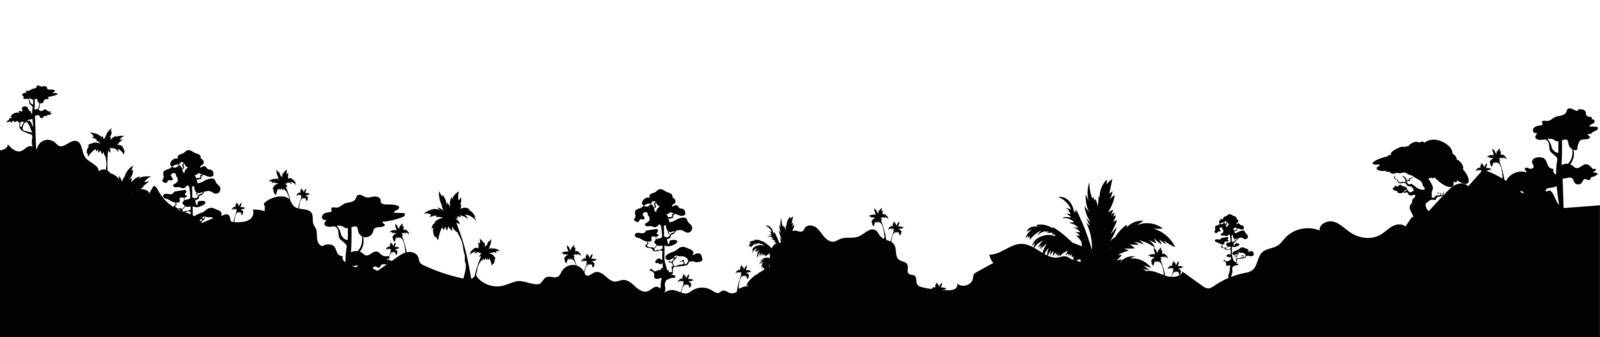 Jungle black silhouette vector illustration. Panoramic valley with trees and bushes. Subtropical meadow foliage with hills. Exotic monochrome landscape. Tropical rainforest 2d cartoon shape by ntl